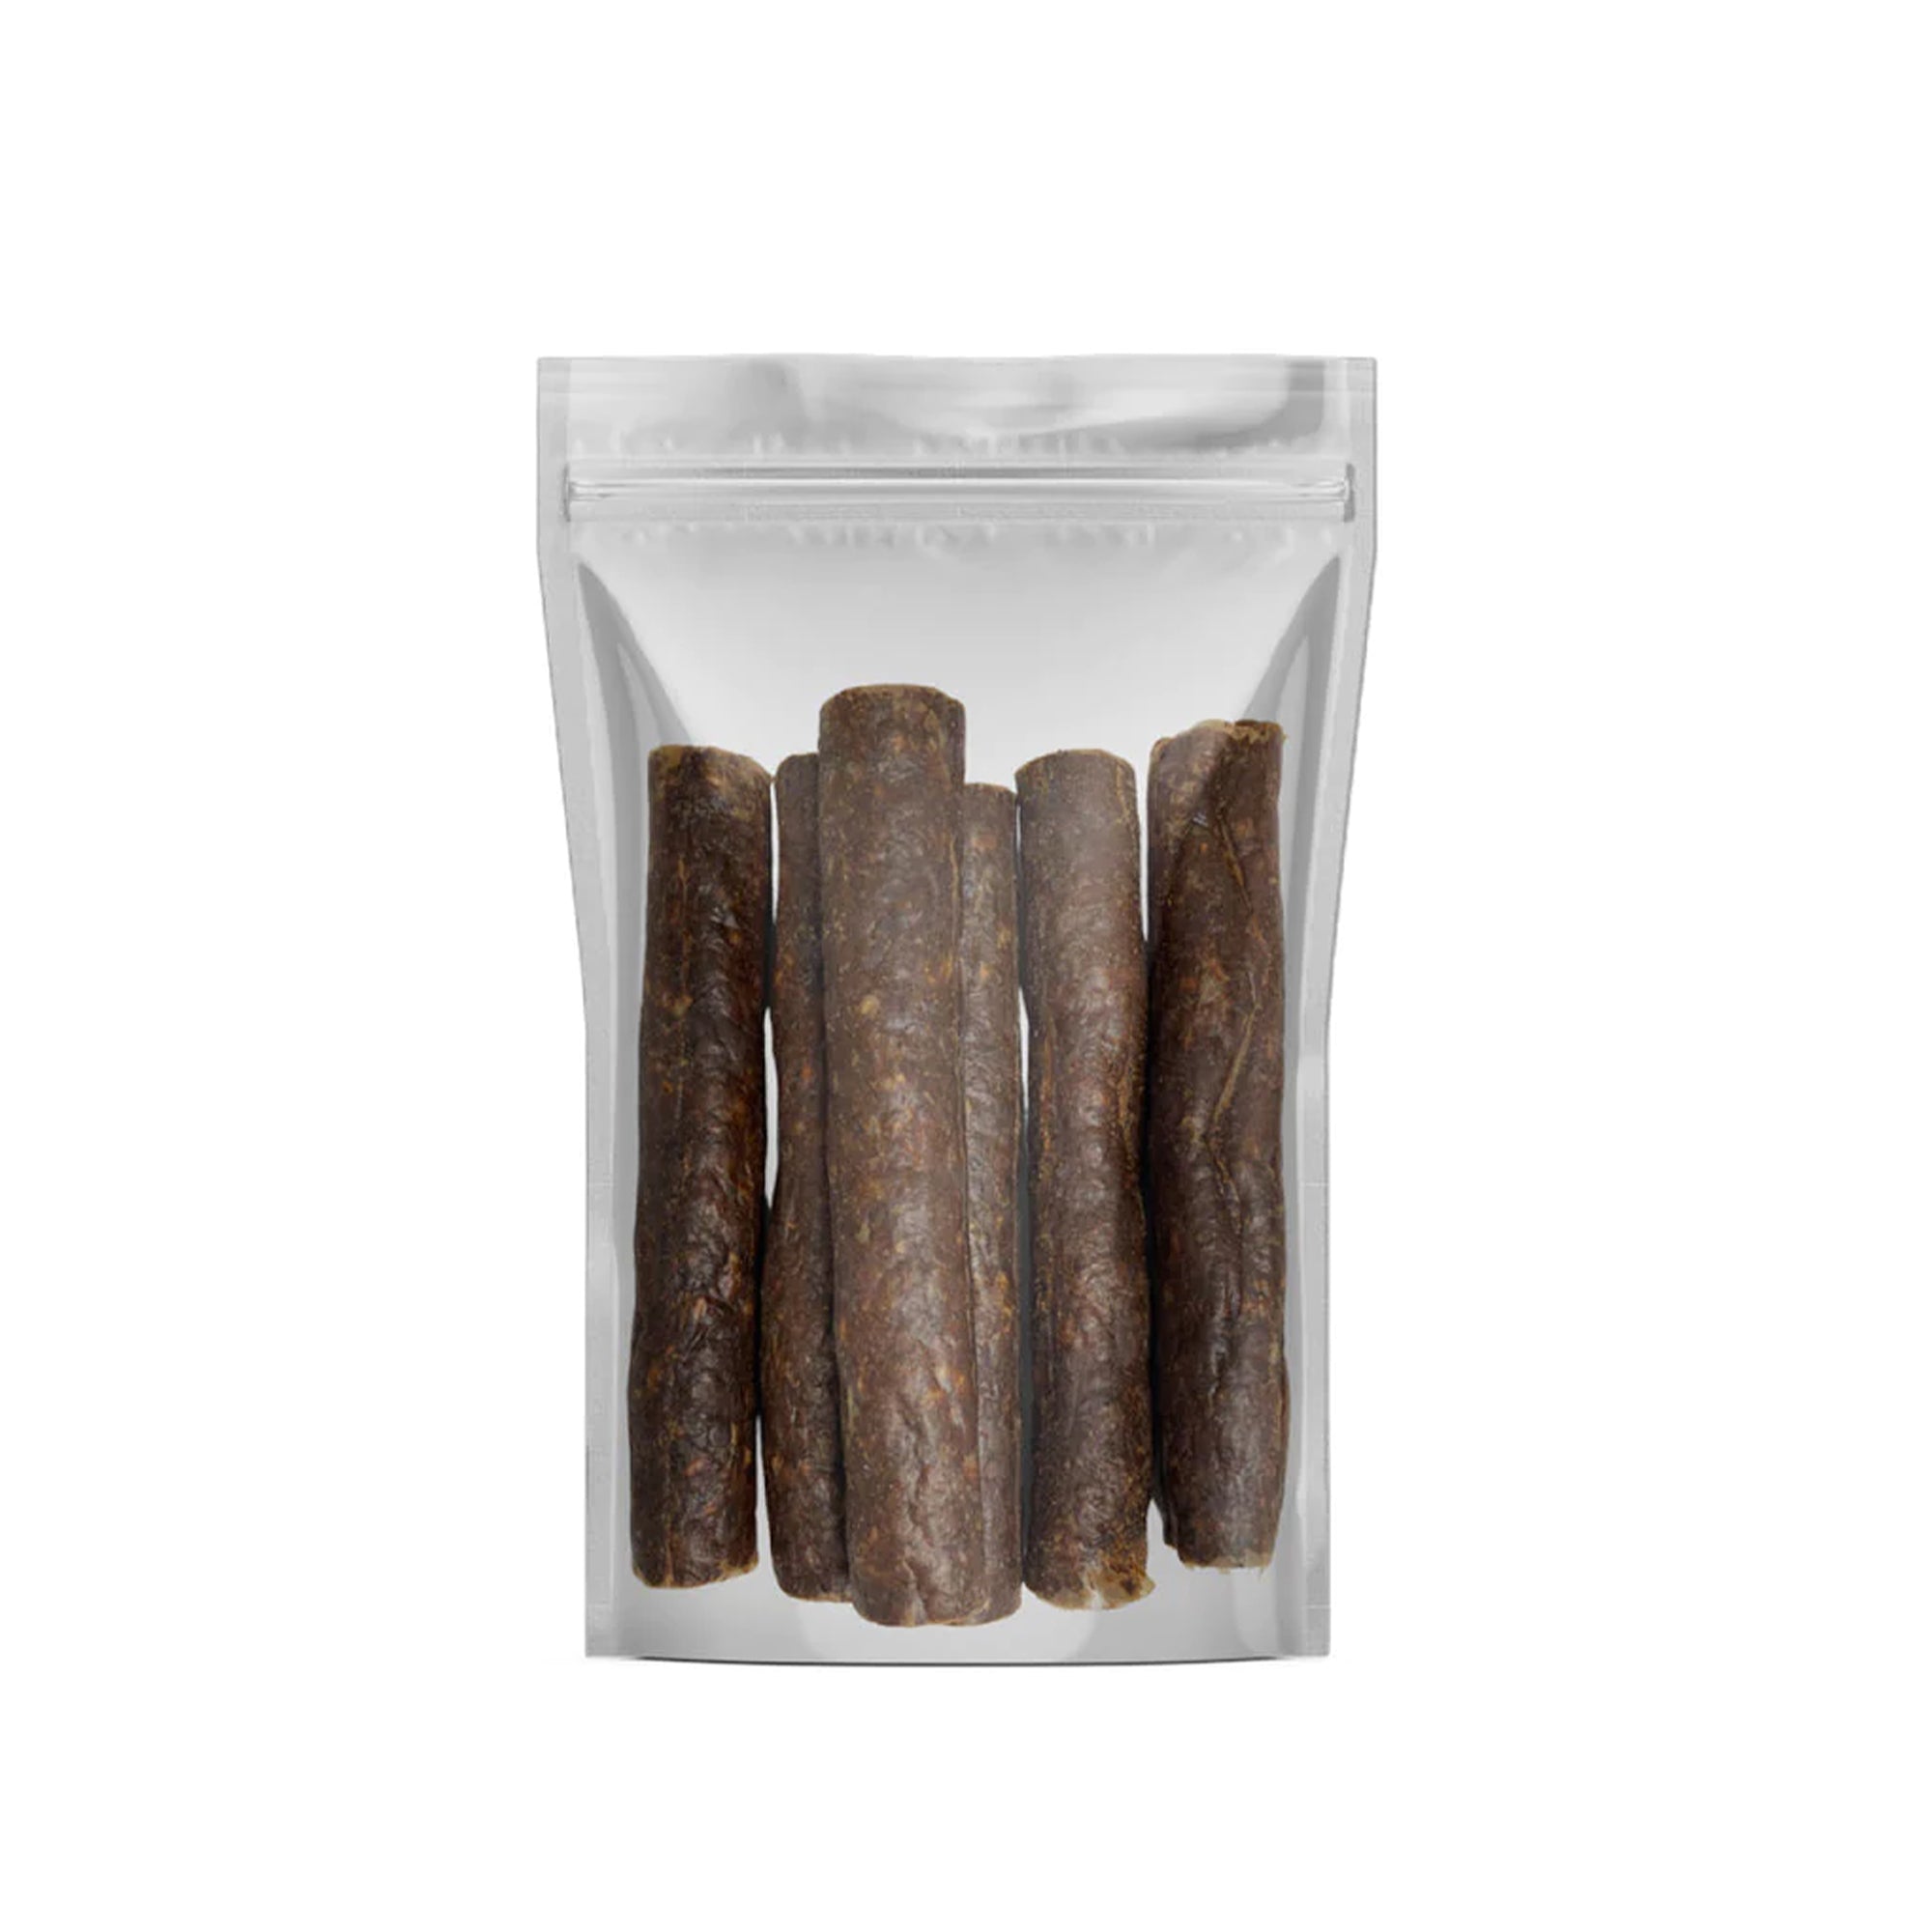 6” Beef Sausages - 6 Count - 6” Beef Sausages - 6 Count - K9warehouse.com